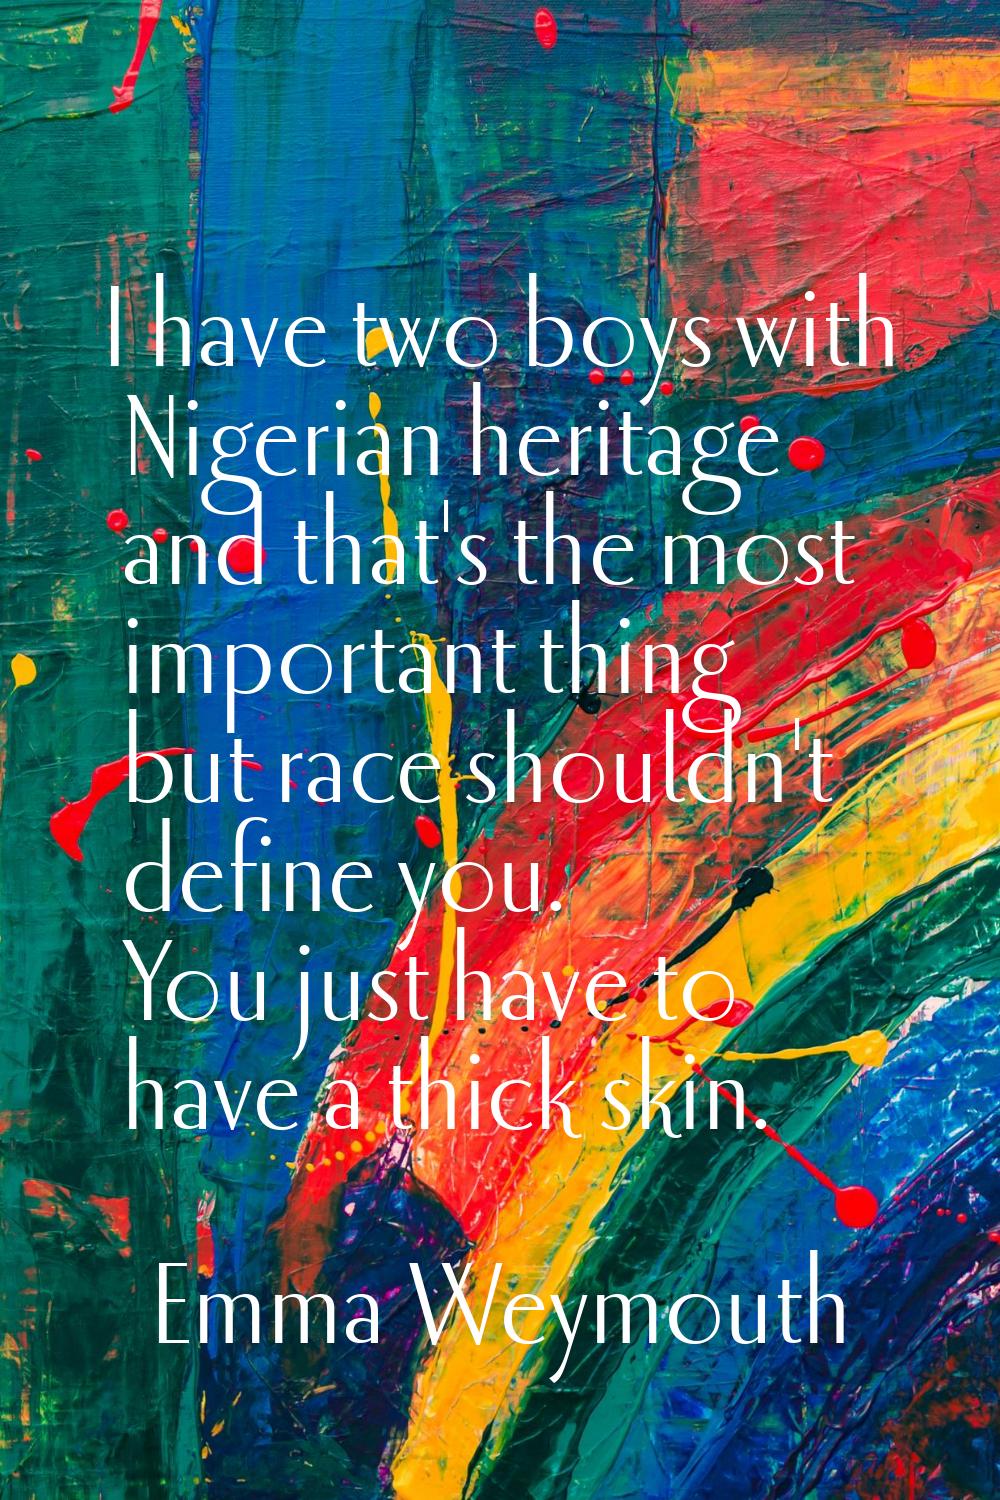 I have two boys with Nigerian heritage and that's the most important thing but race shouldn't defin